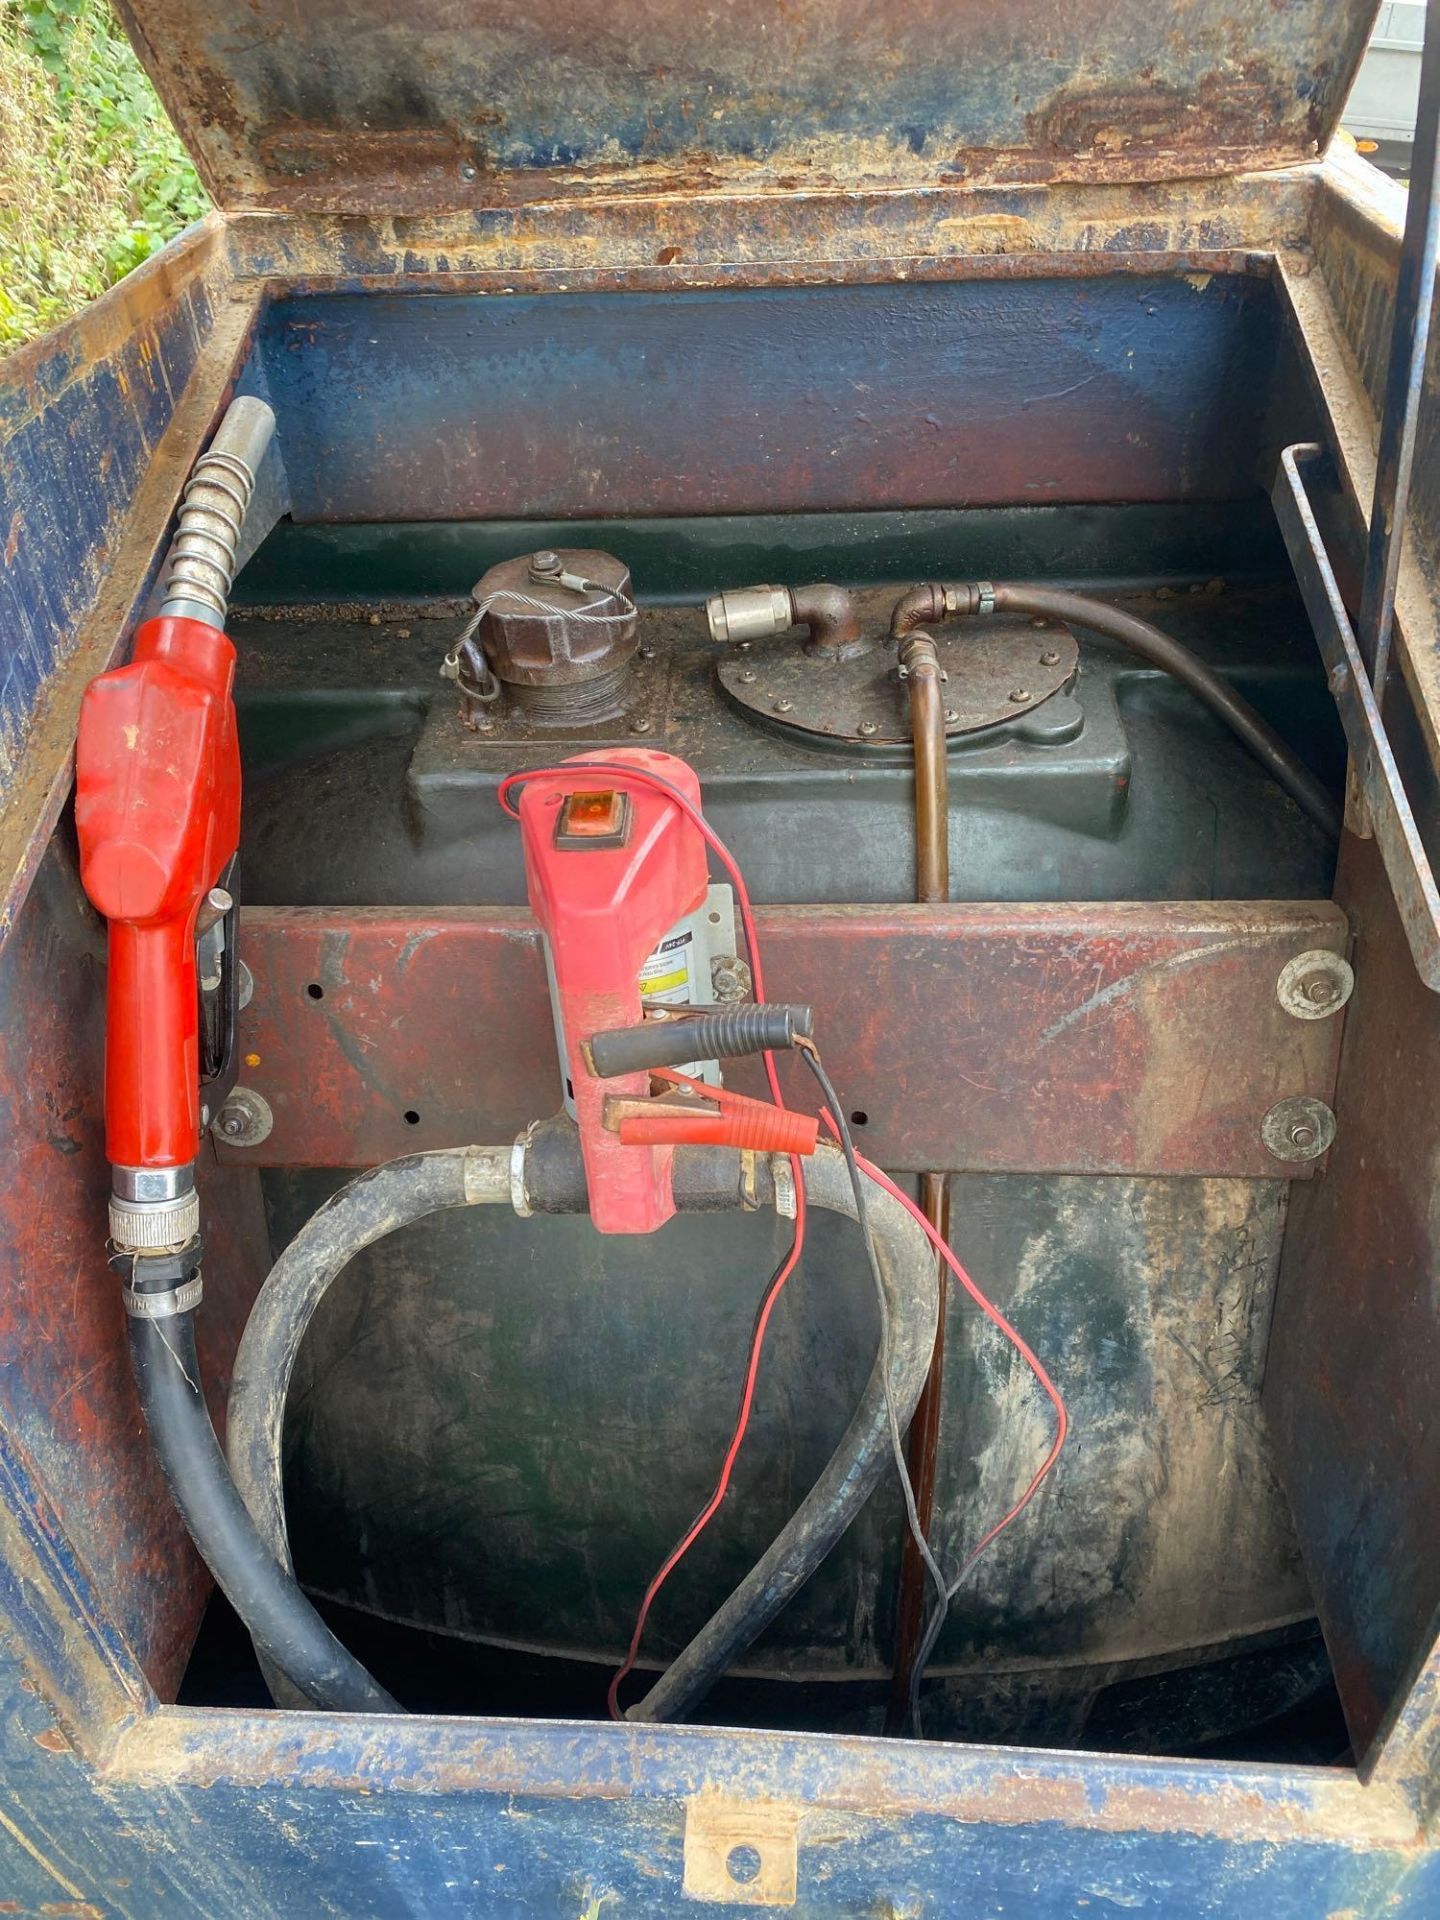 Fuel safe 500 bunded fuel tank with 12v battery operated dispensing unit, capacity approximately - Image 4 of 5